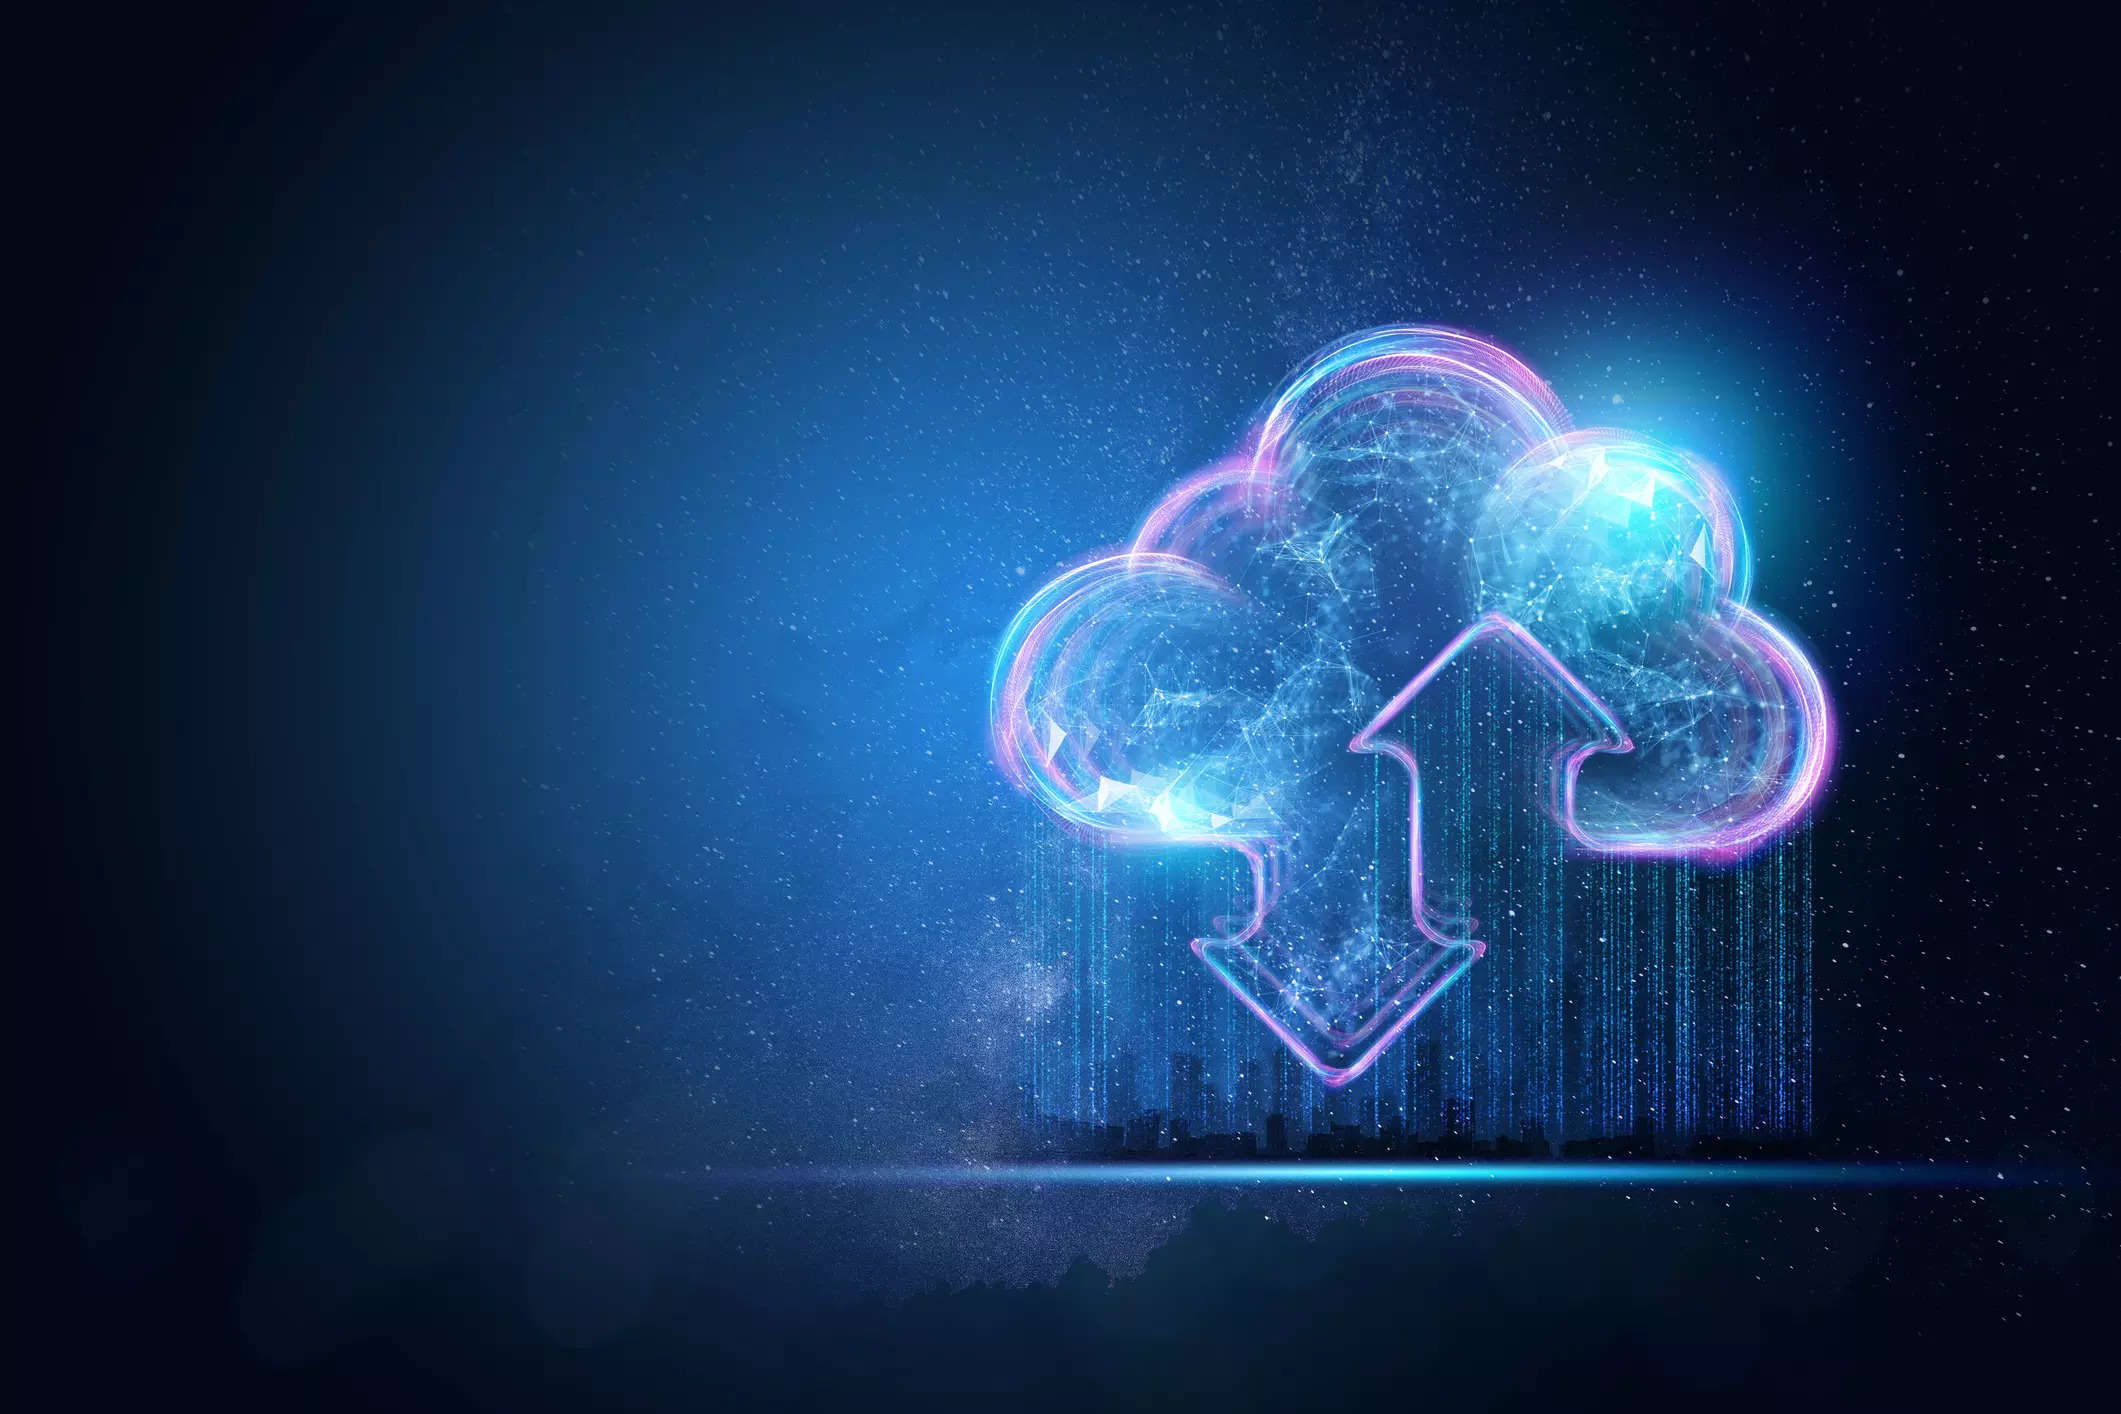 Global mobile cloud market size is expected to reach $202 Bn by 2028